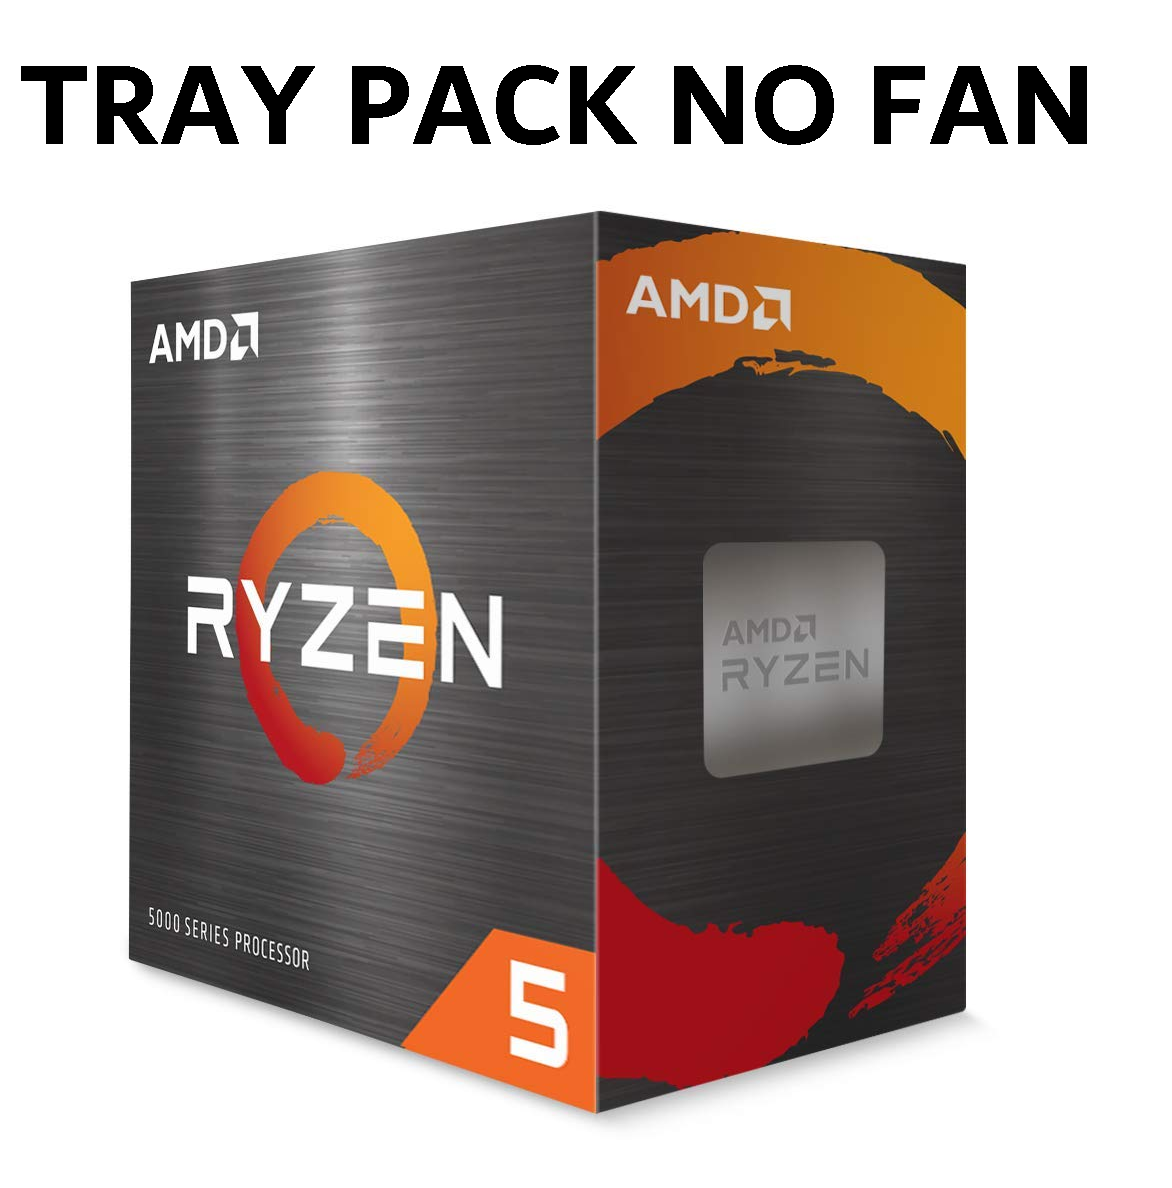 buy (Clamshell Or Installed On MBs) AMD Ryzen 5 1600 'TRAY', YD1600BBM6IAE 6 Core/12 Threads AM4 CPU, No Fan, 1YW (AMDCPU)(AMDBOX)(TRAY-P) online from our Melbourne shop